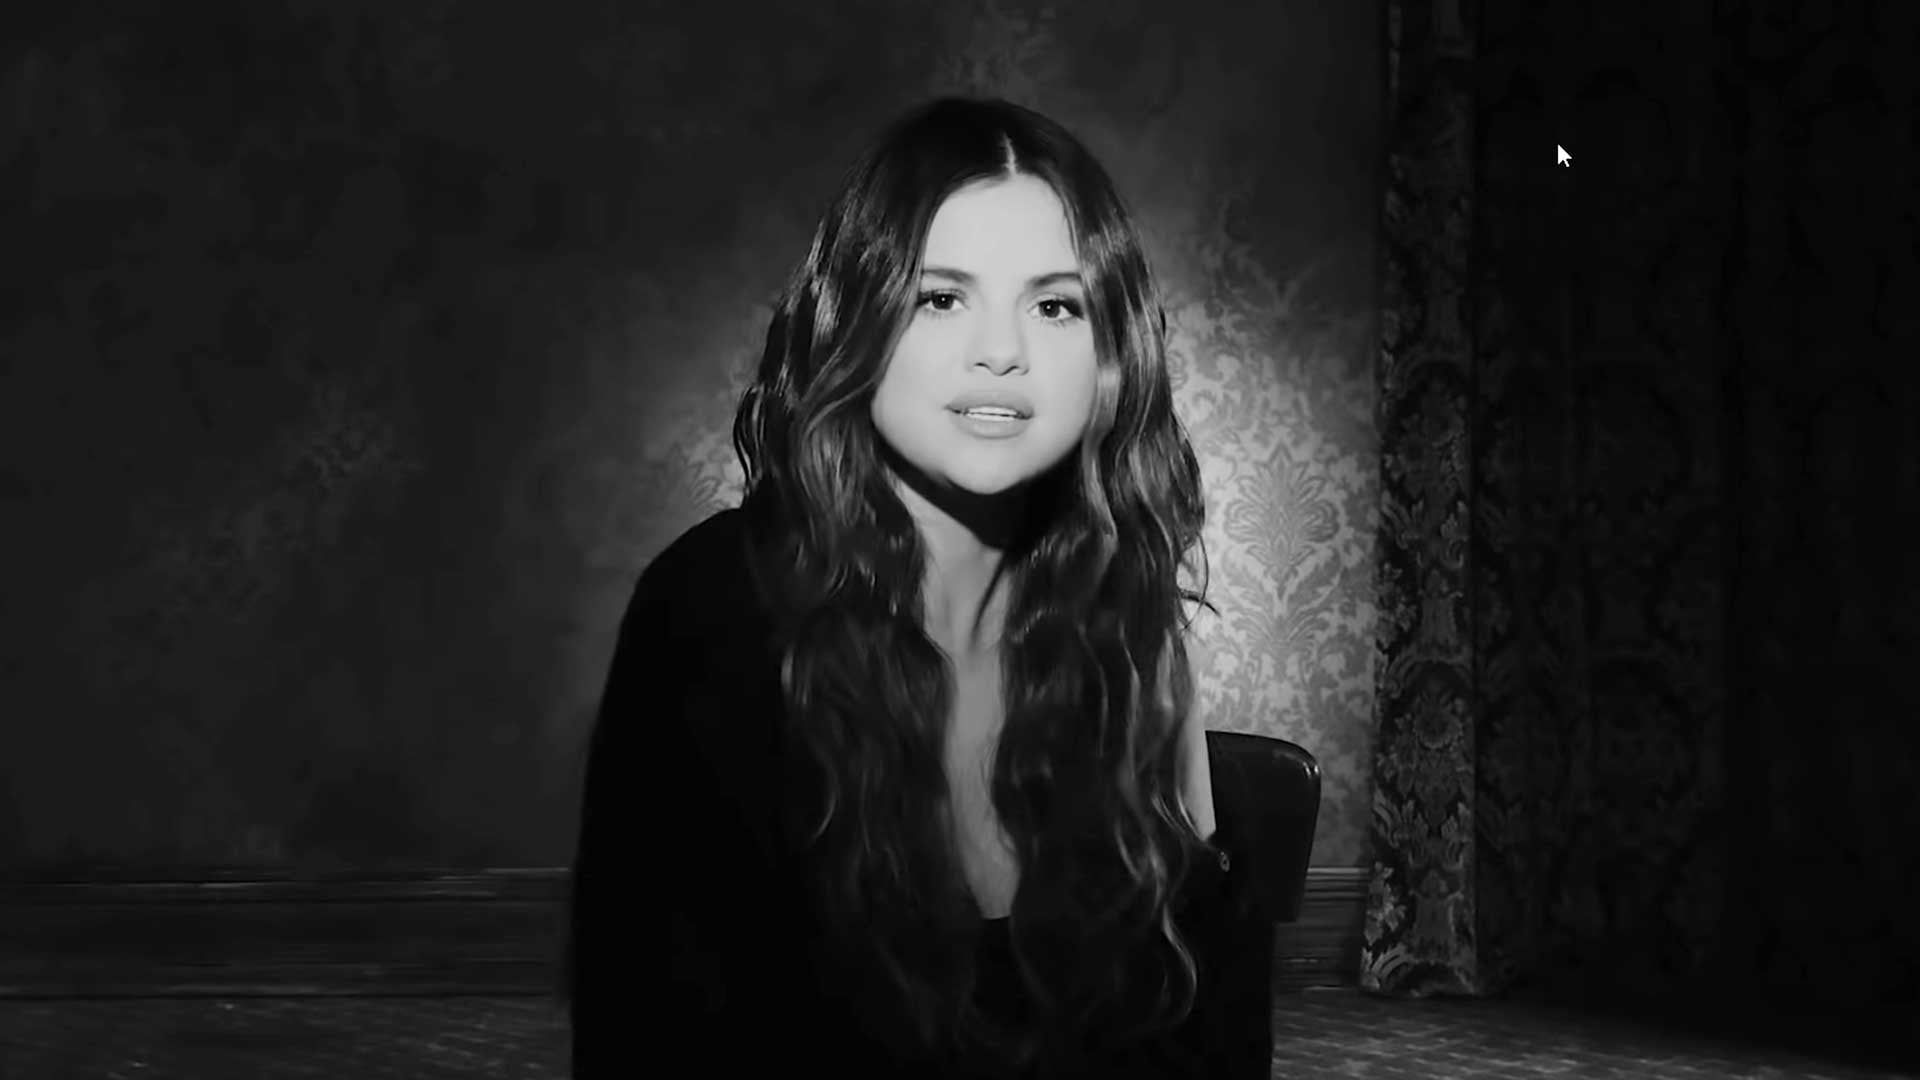 Selena Gomez Drops Emotional New Music Video for 'Lose You to Love Me' - Listen!